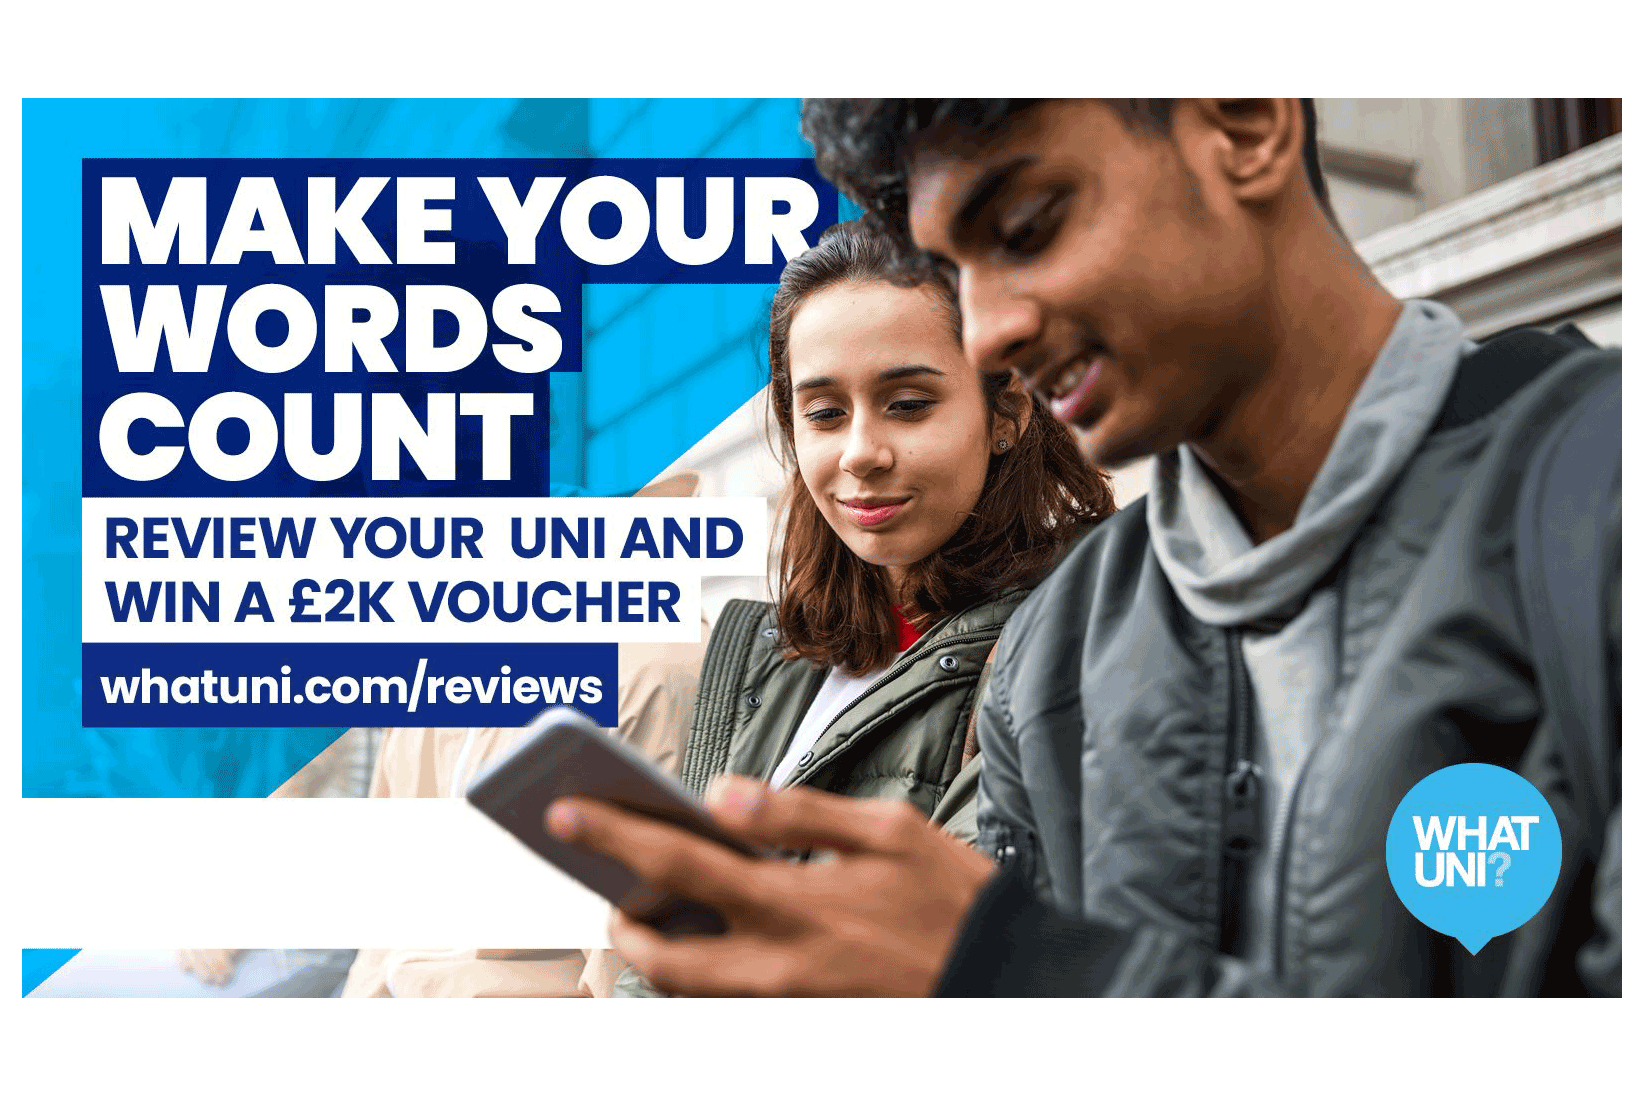 Make your words count. Review your uni and win a £2k voucher. whatuni.com/reviews